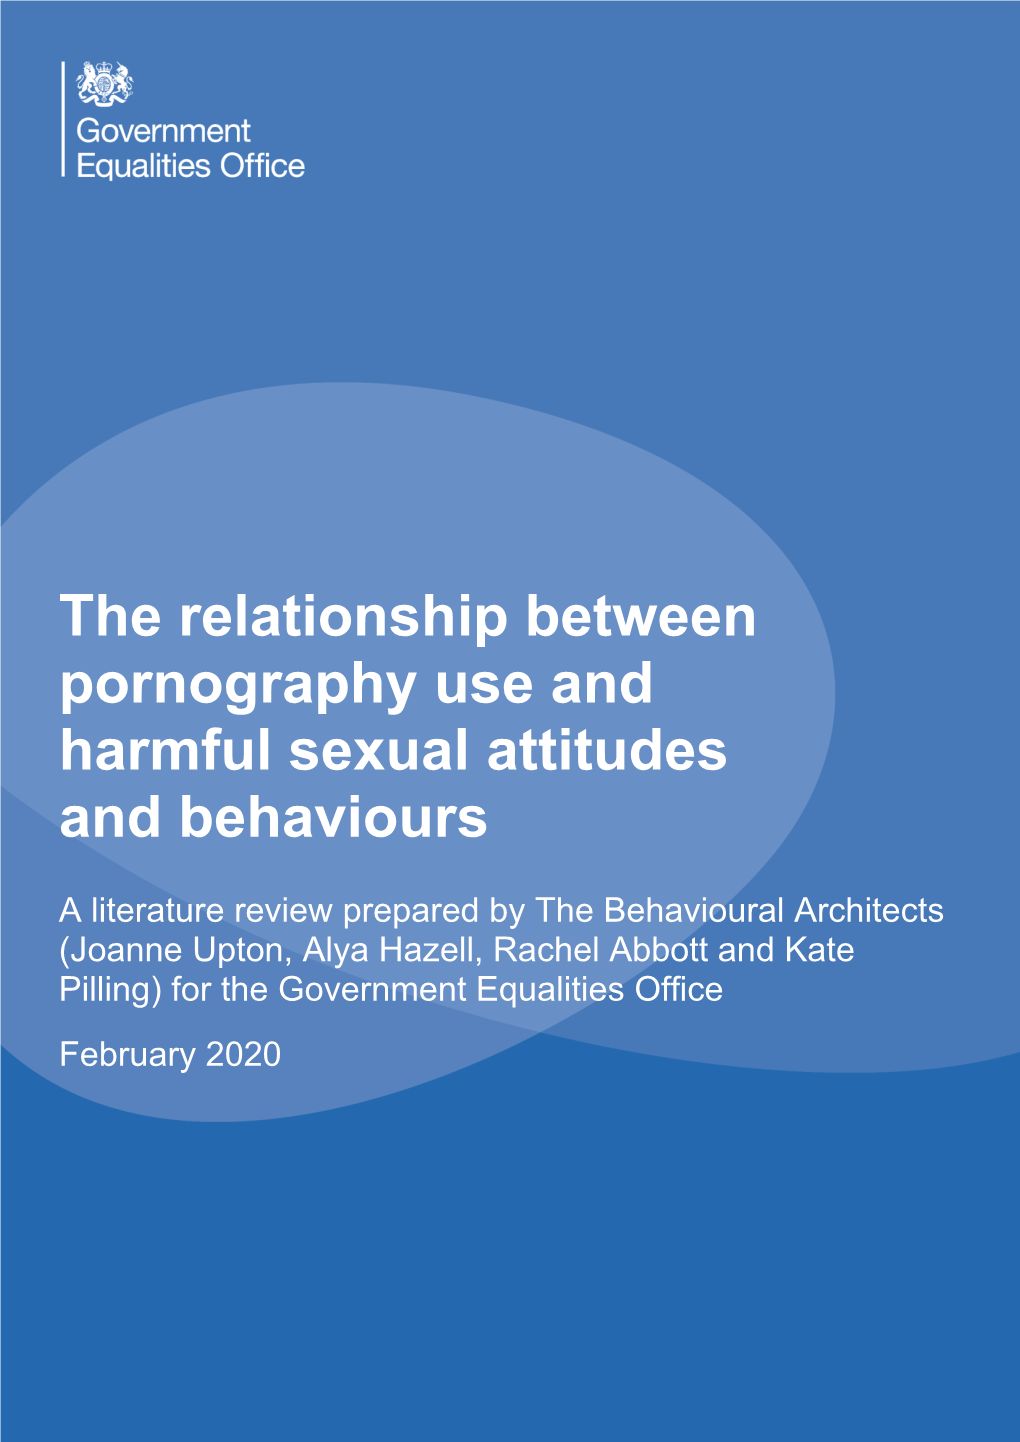 The Relationship Between Pornography Use and Harmful Sexual Attitudes and Behaviours